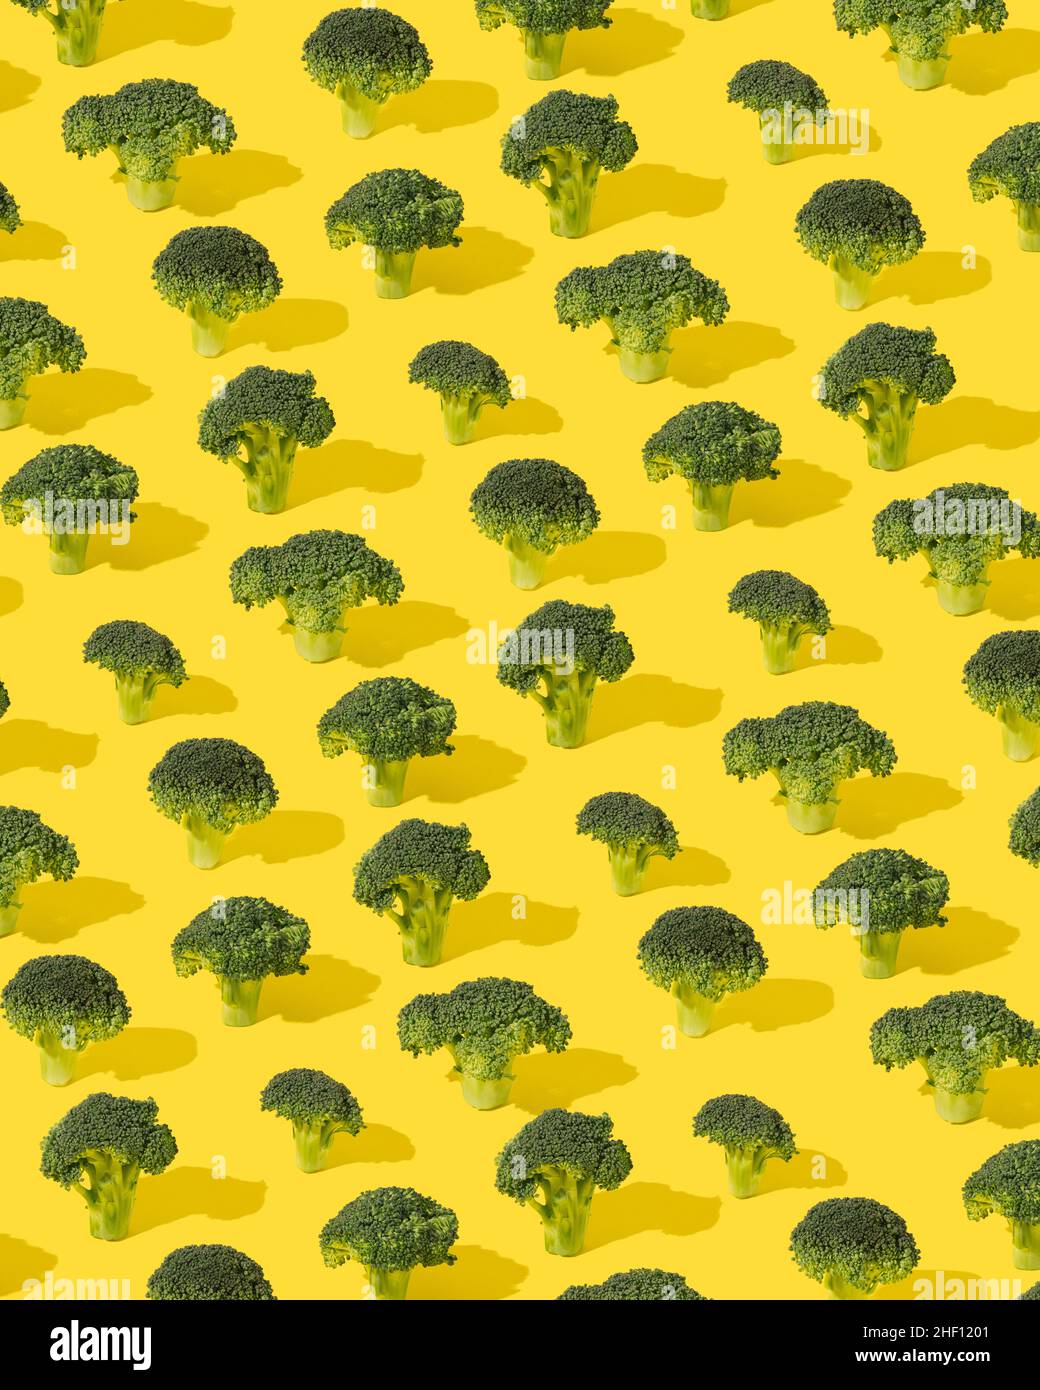 Pattern made of green broccoli flowers on a yellow background. Sustainable development minimal concept. Stock Photo